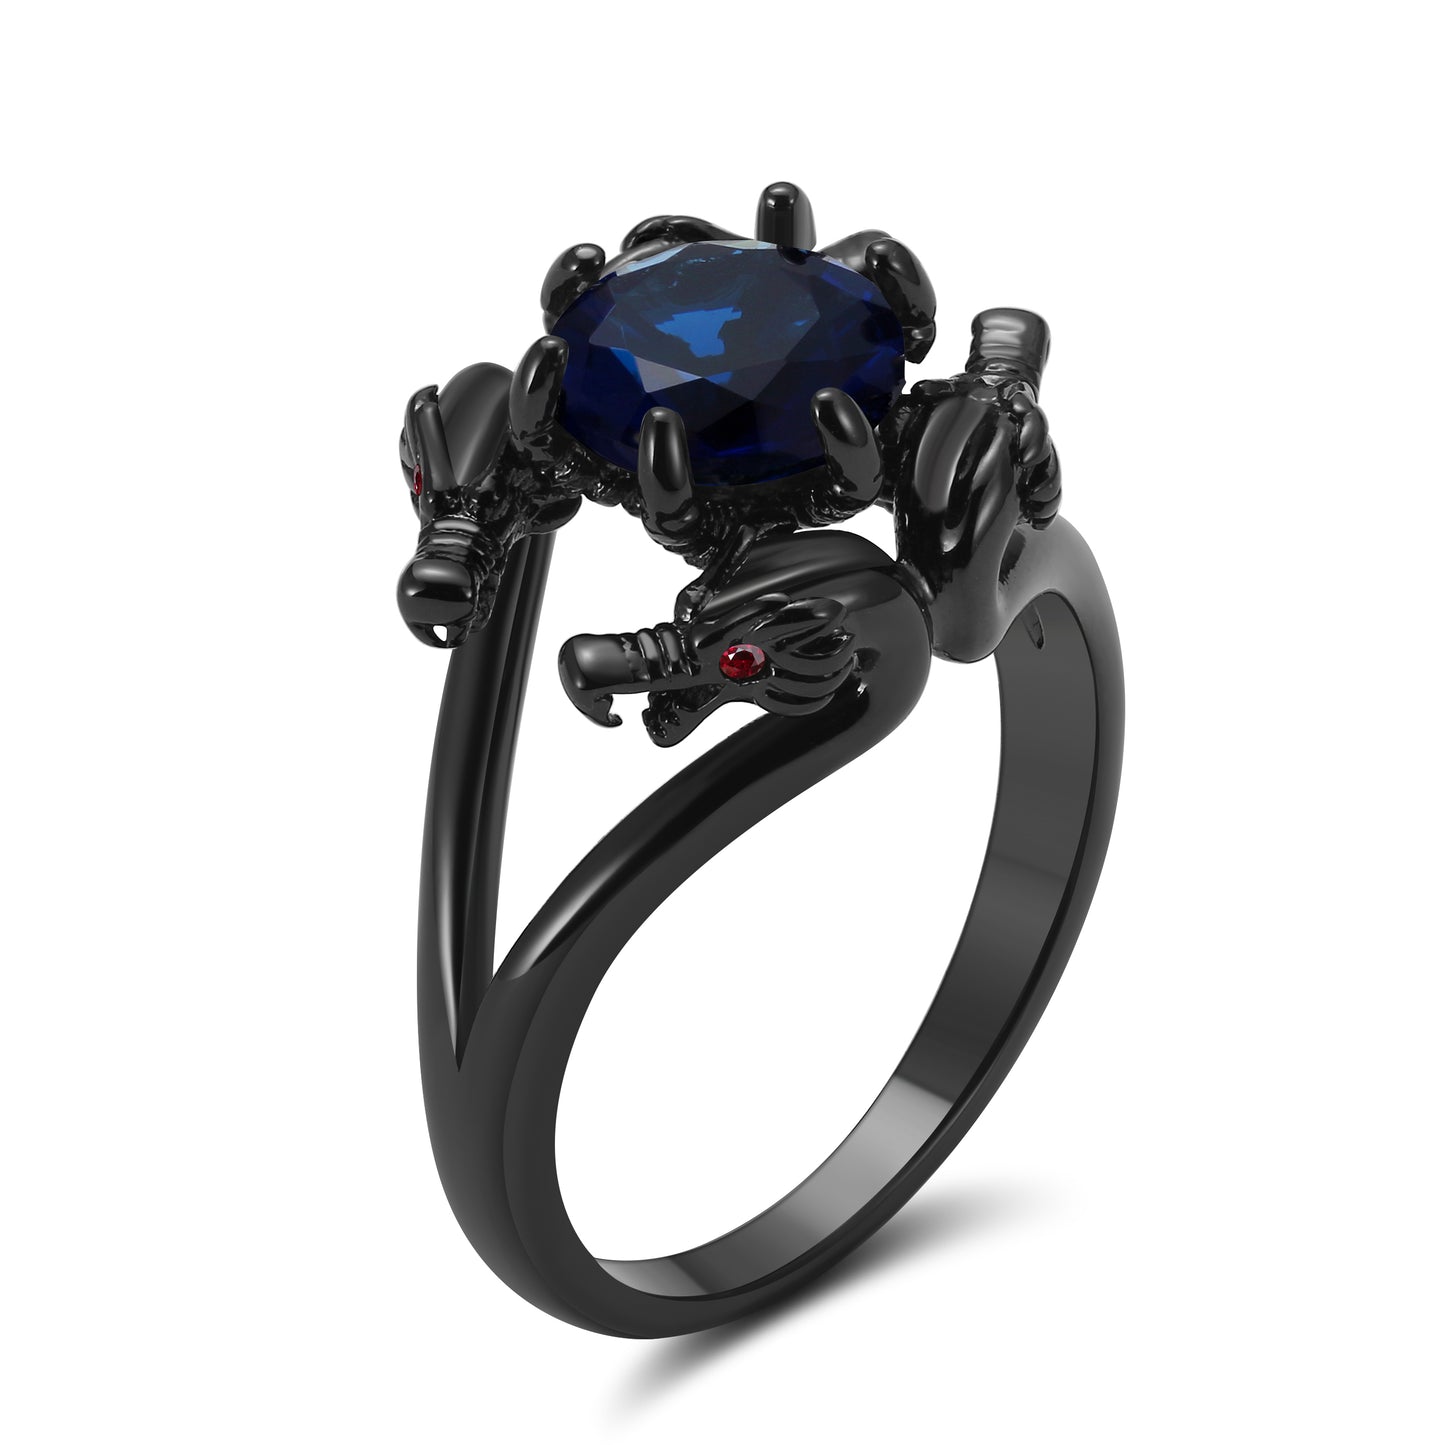 Dragon Ring Gothic Solitaire Cz Black Gothic Engagement Ring Girl Ginger Lyne Collection - Blue,9